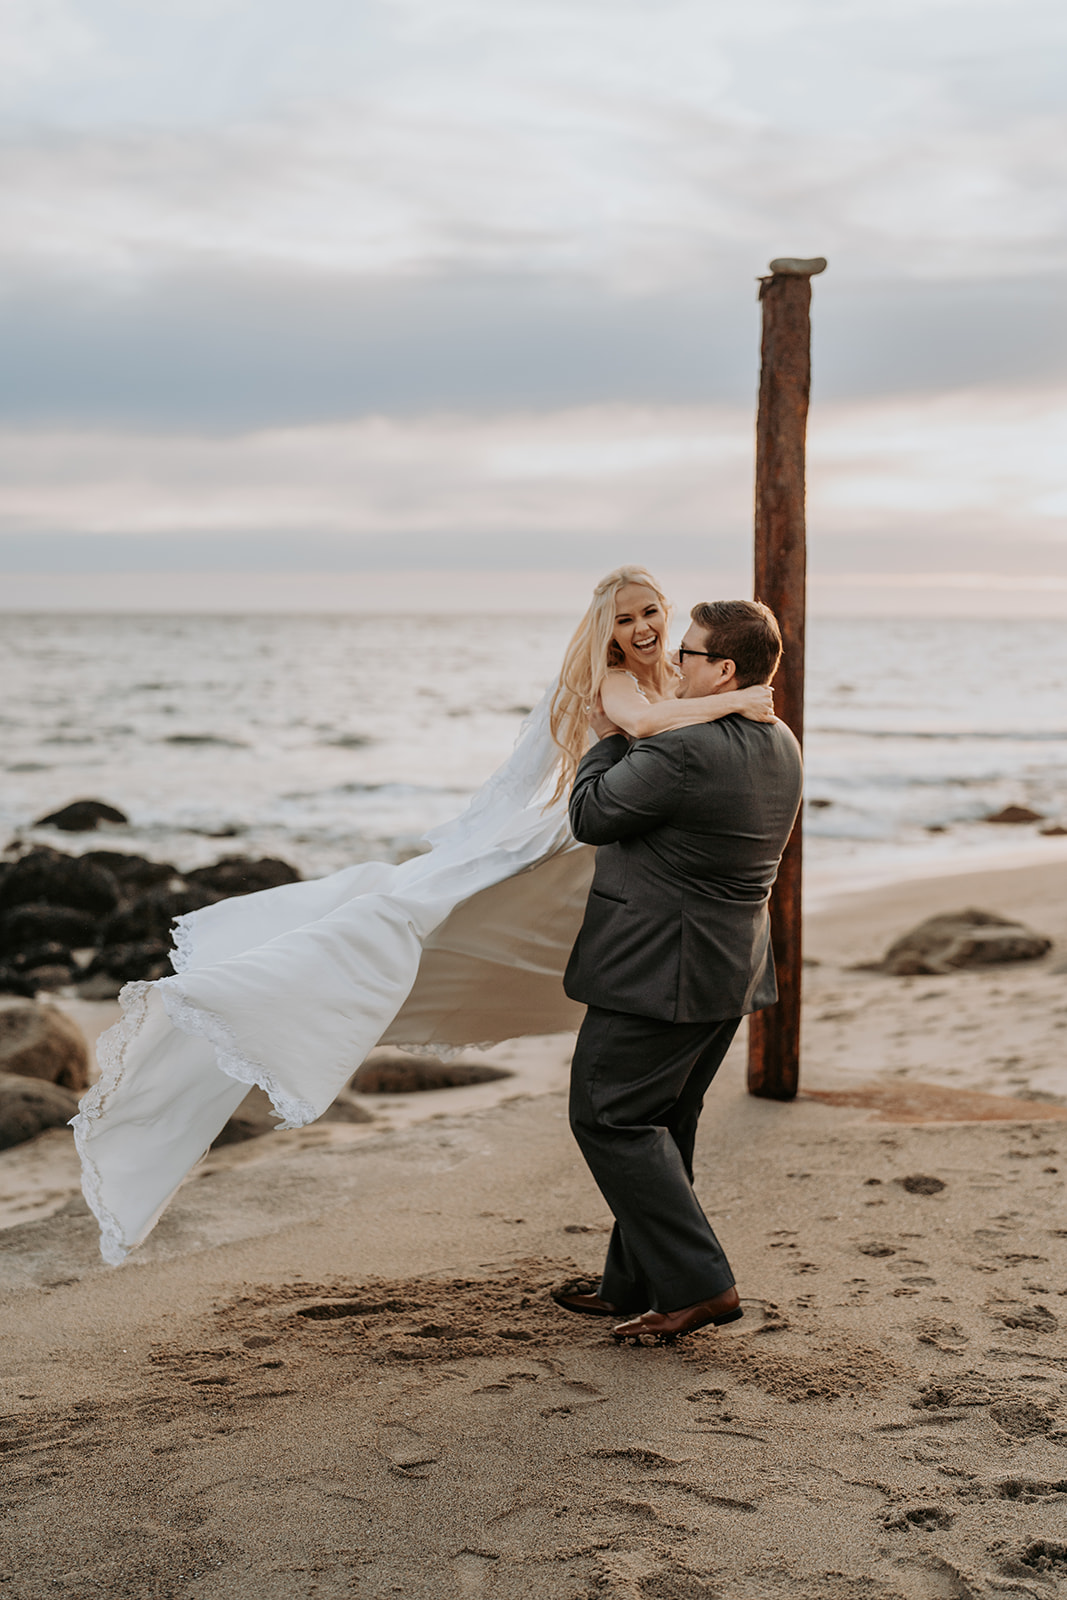 Why Couples Should Opt For Wedding Sunset Photos